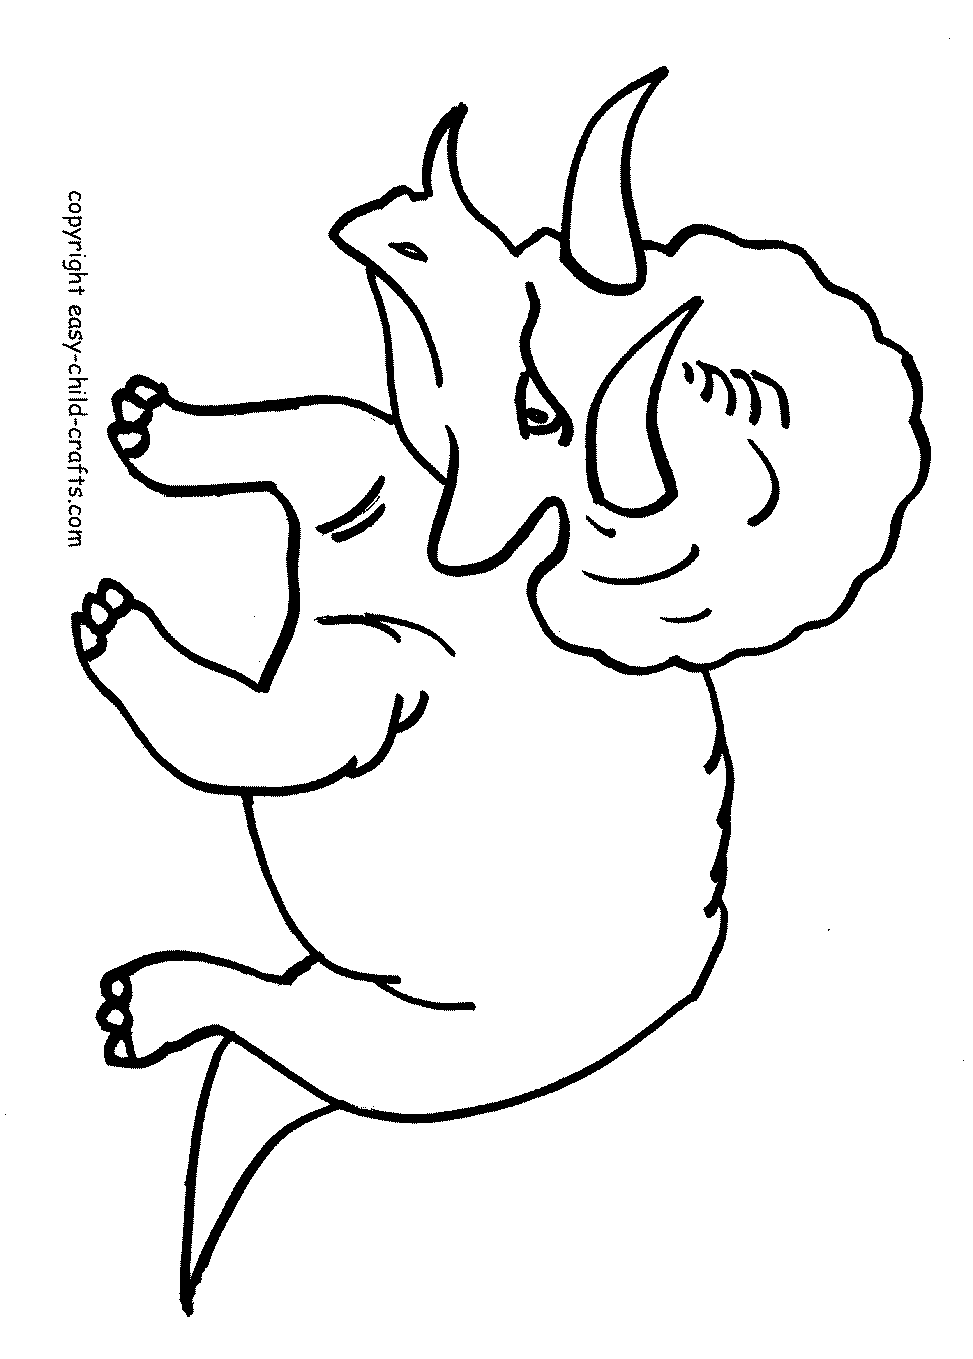 dinosaur pictures to print for free angry triceratops dinosaur coloring pages for kids free dinosaur to pictures for print 